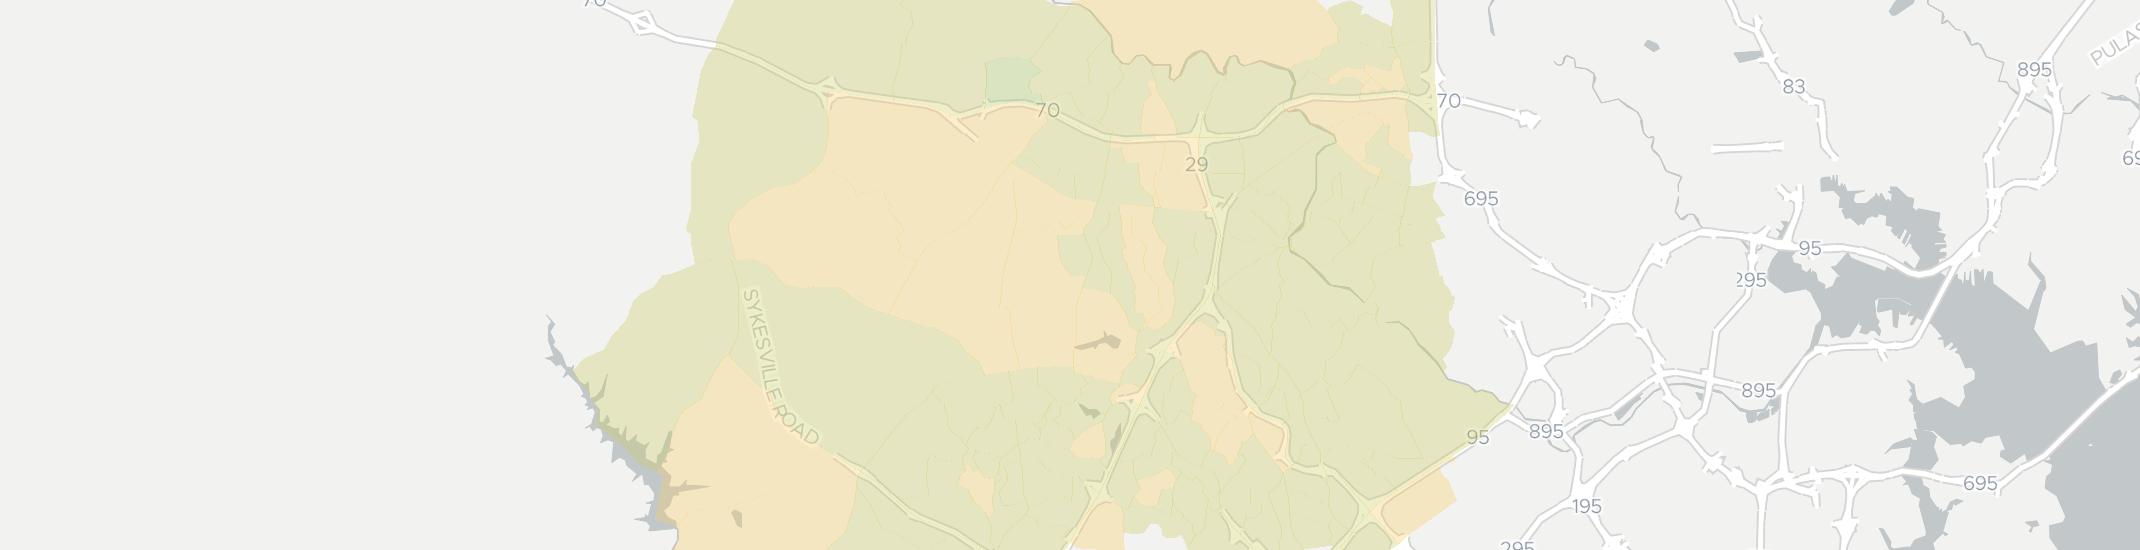 Ellicott City Internet Competition Map. Click for interactive map.